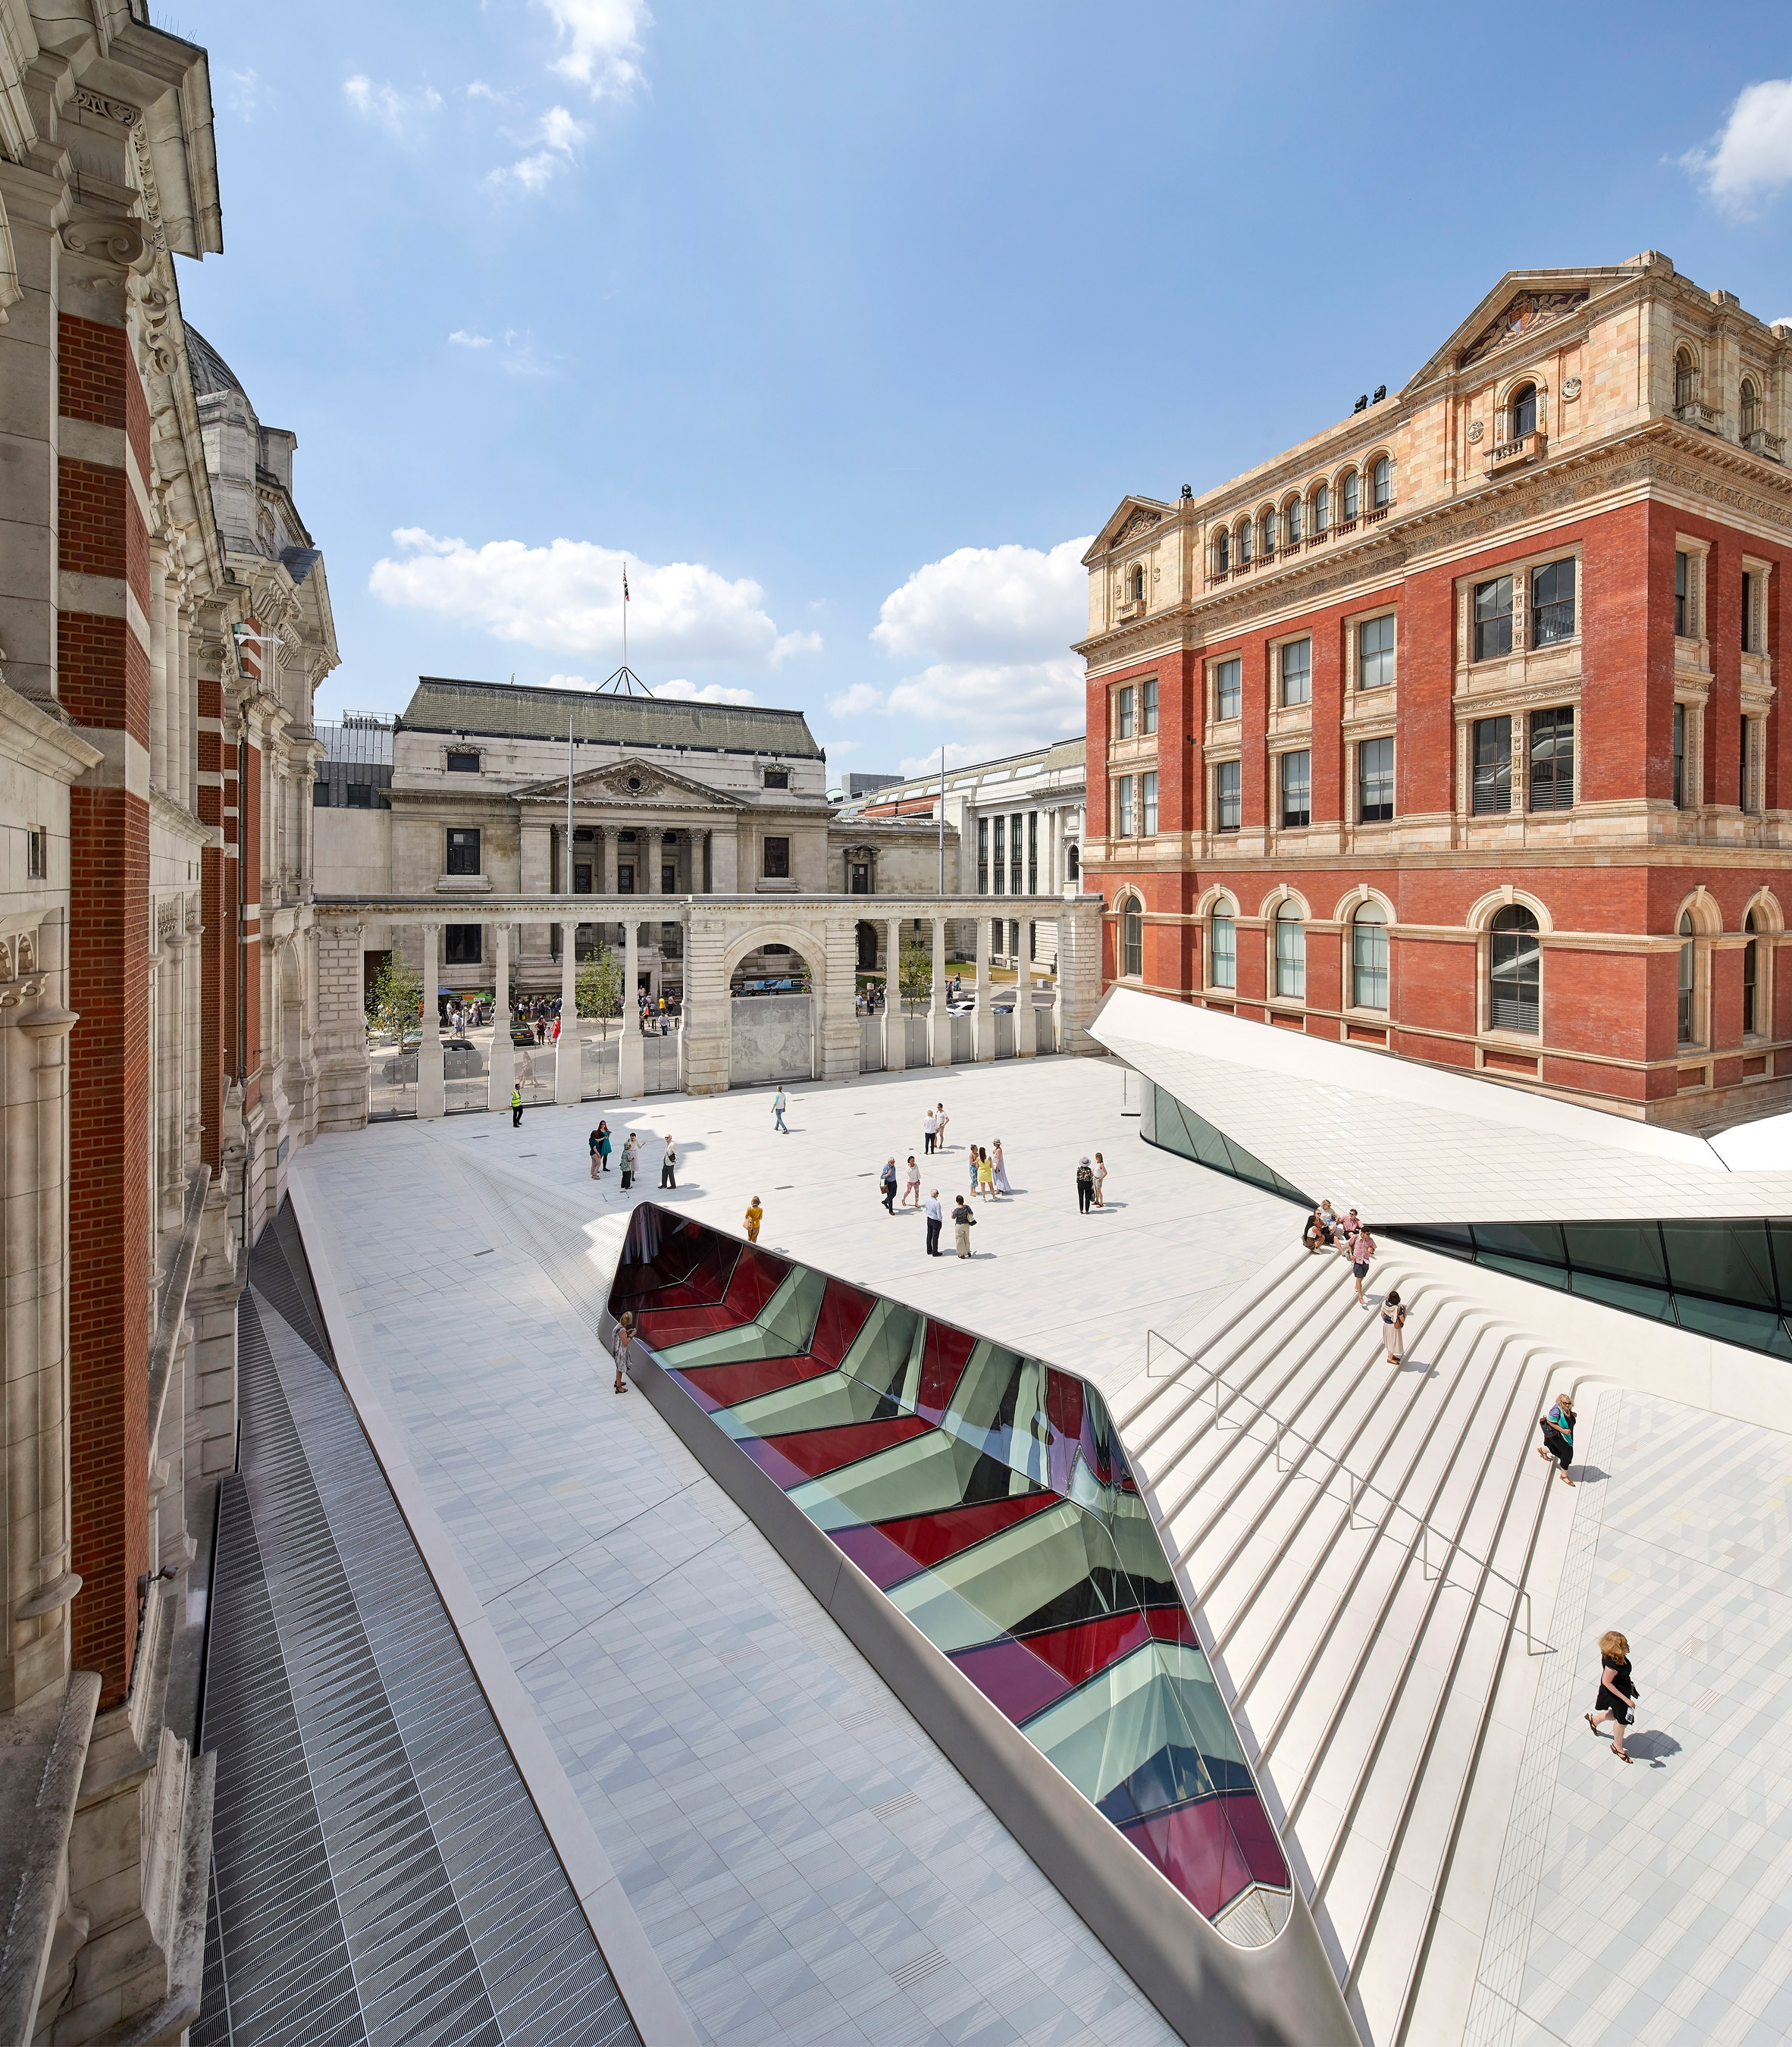 AL_A completes tile-covered entrance and subterranean gallery for London's V&A  museum